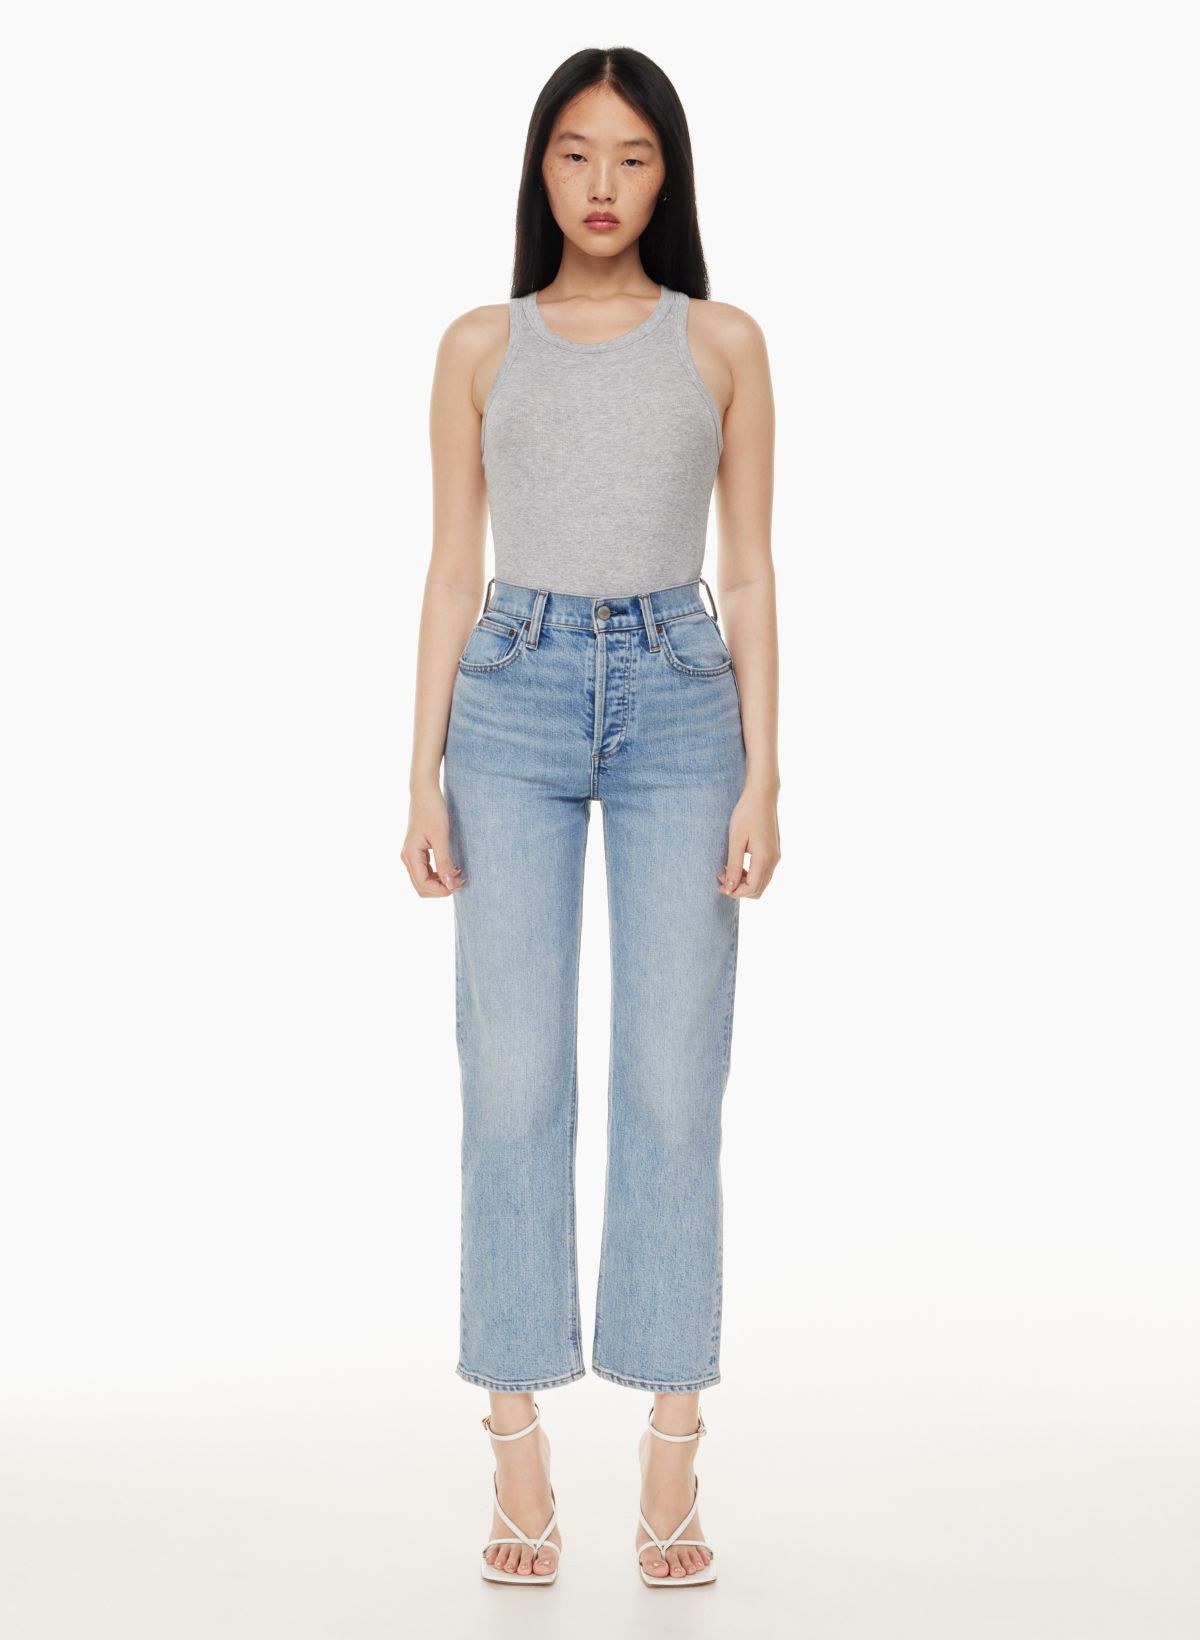 These $15 Straight-Leg Jeans Are So Affordable, I Literally Did a